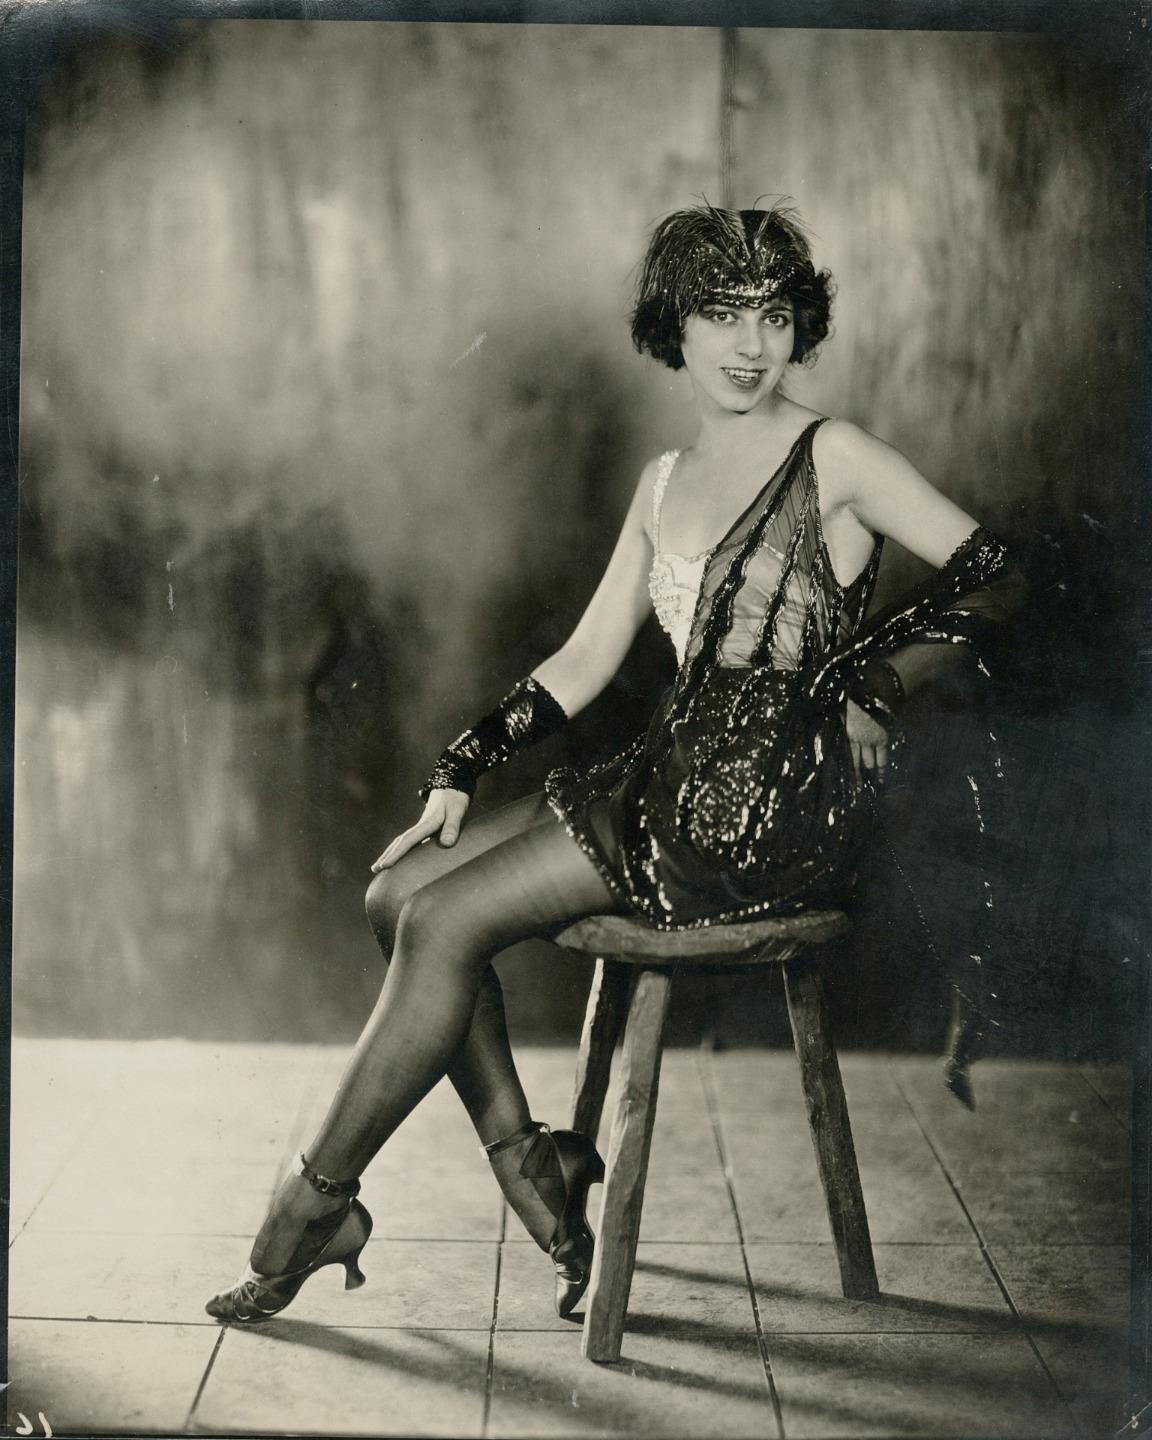 c. 1920's Flapper Performer Photo by James Abbe ART DECO